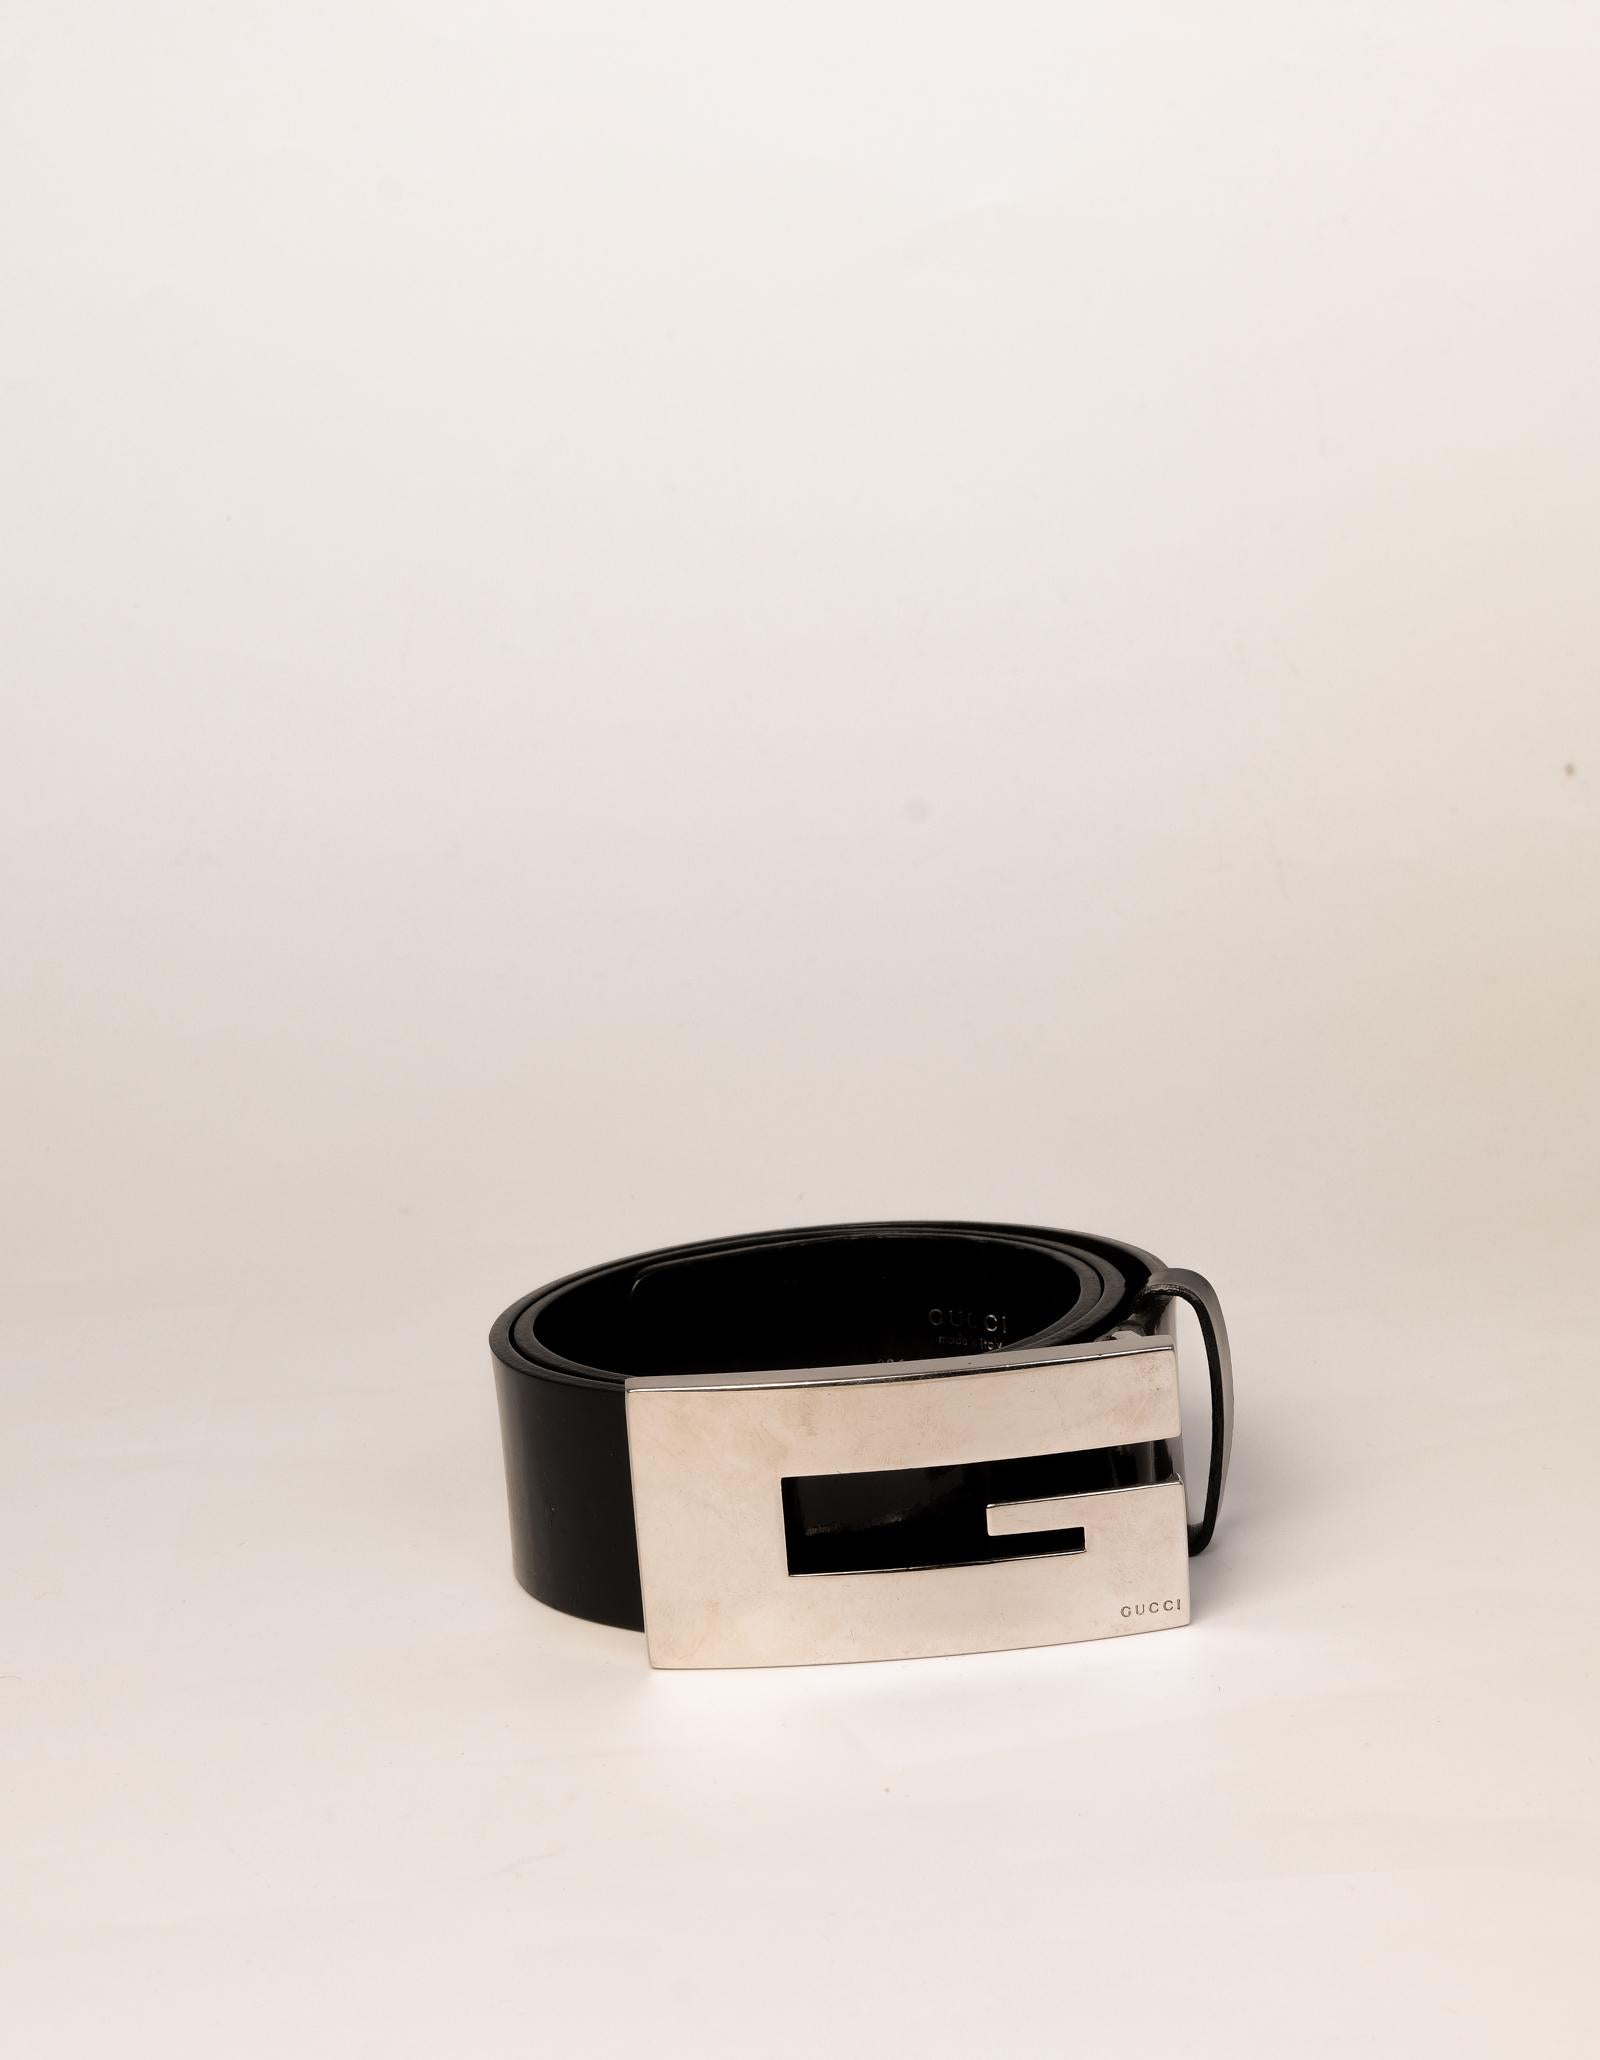 Tom Ford for Gucci vintage black leather belt with silver toned logo 